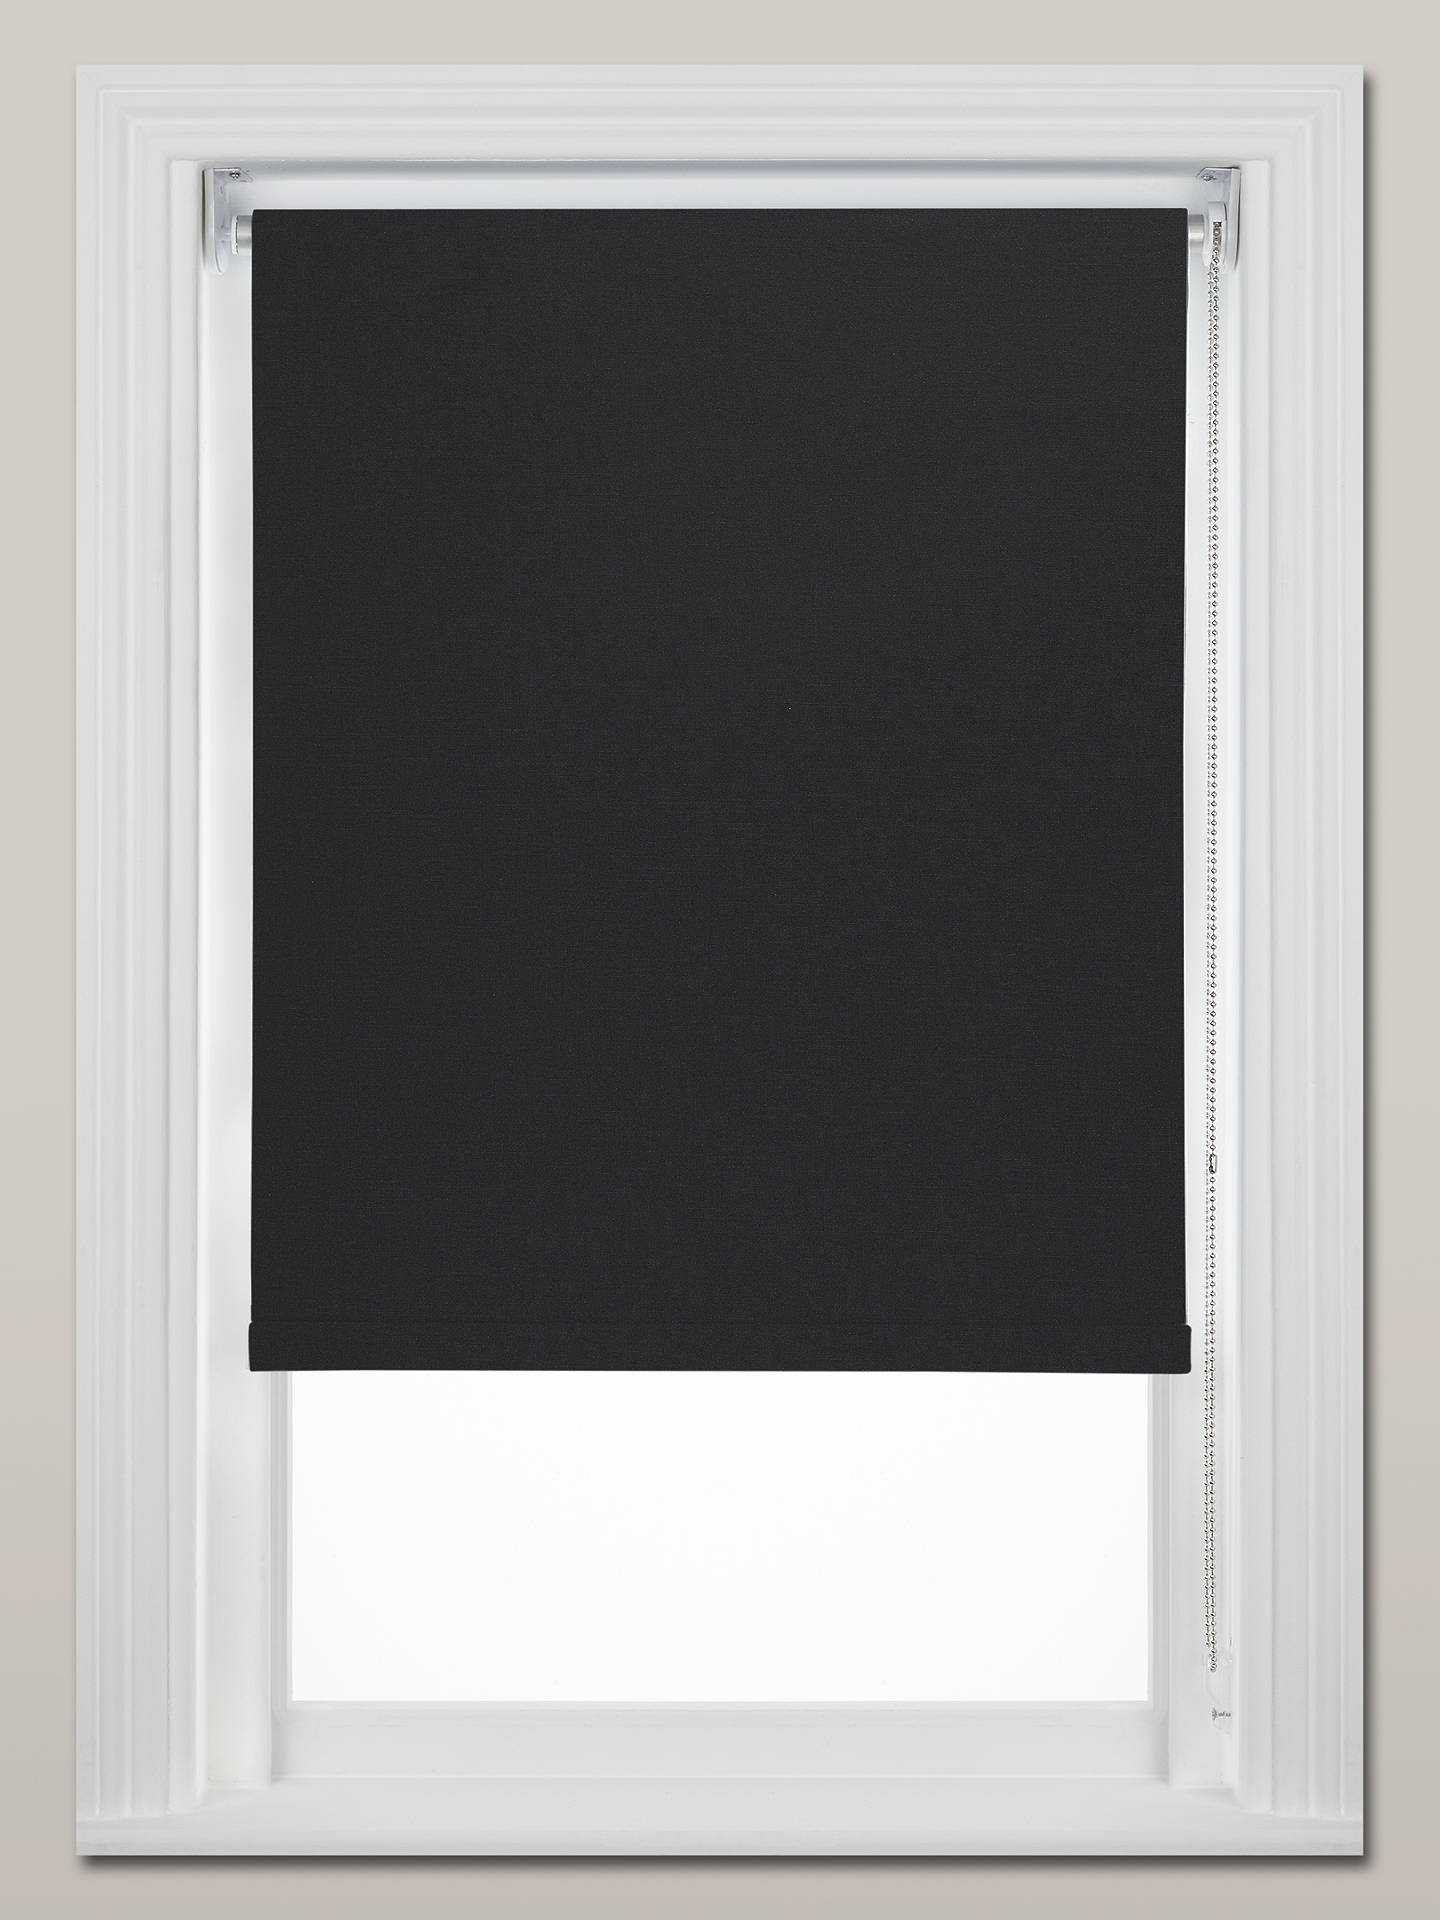 John Lewis Lima Made to Measure Daylight Roller Blind, Midnight Black